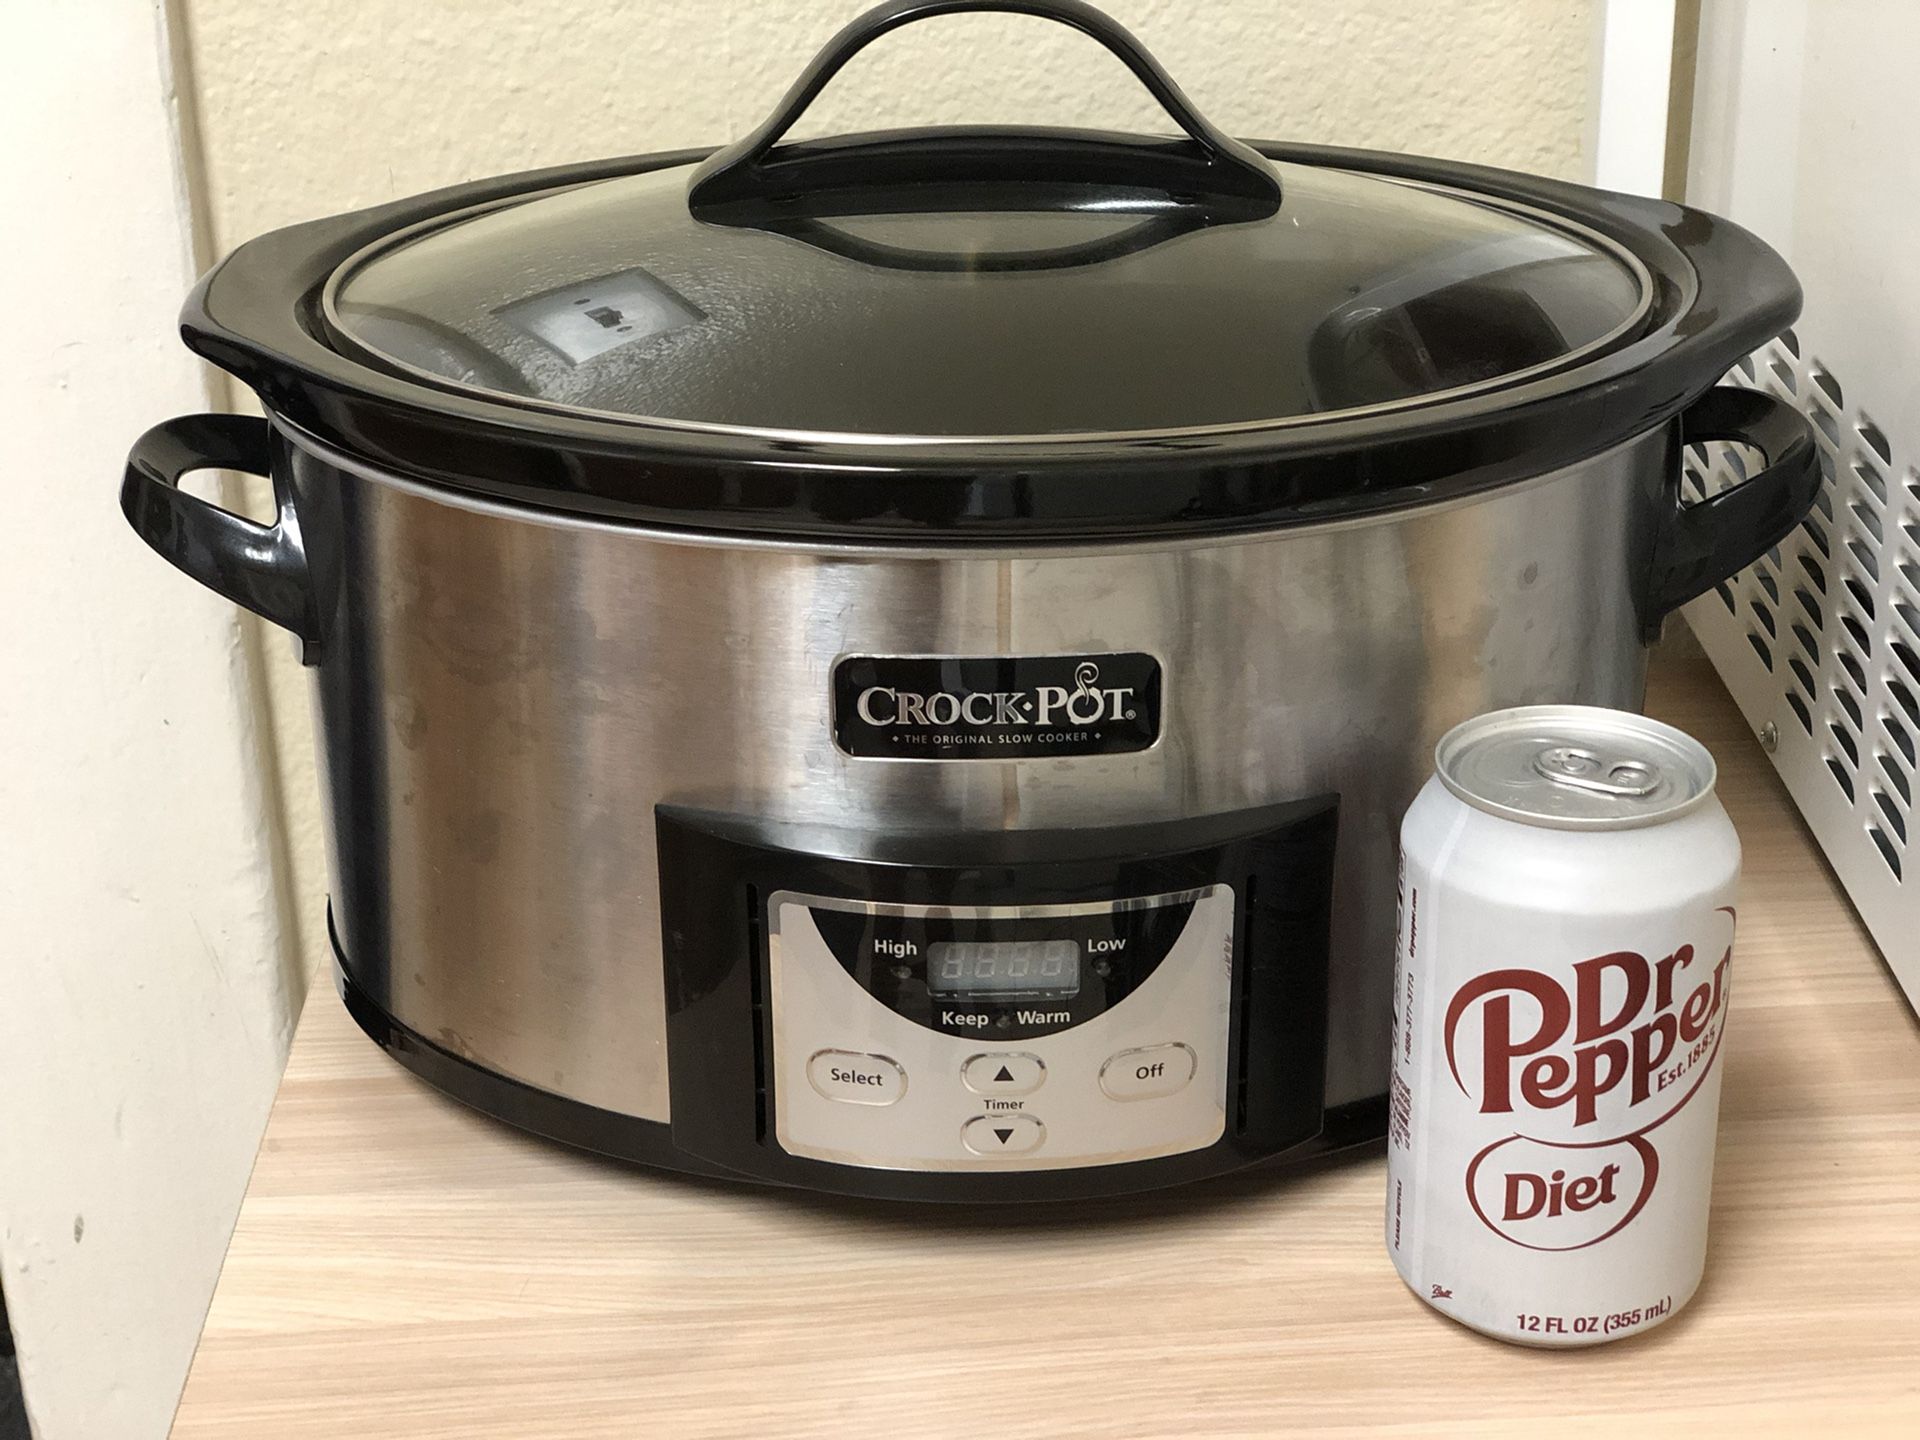 Crock Pot Slow Cooker from Costco